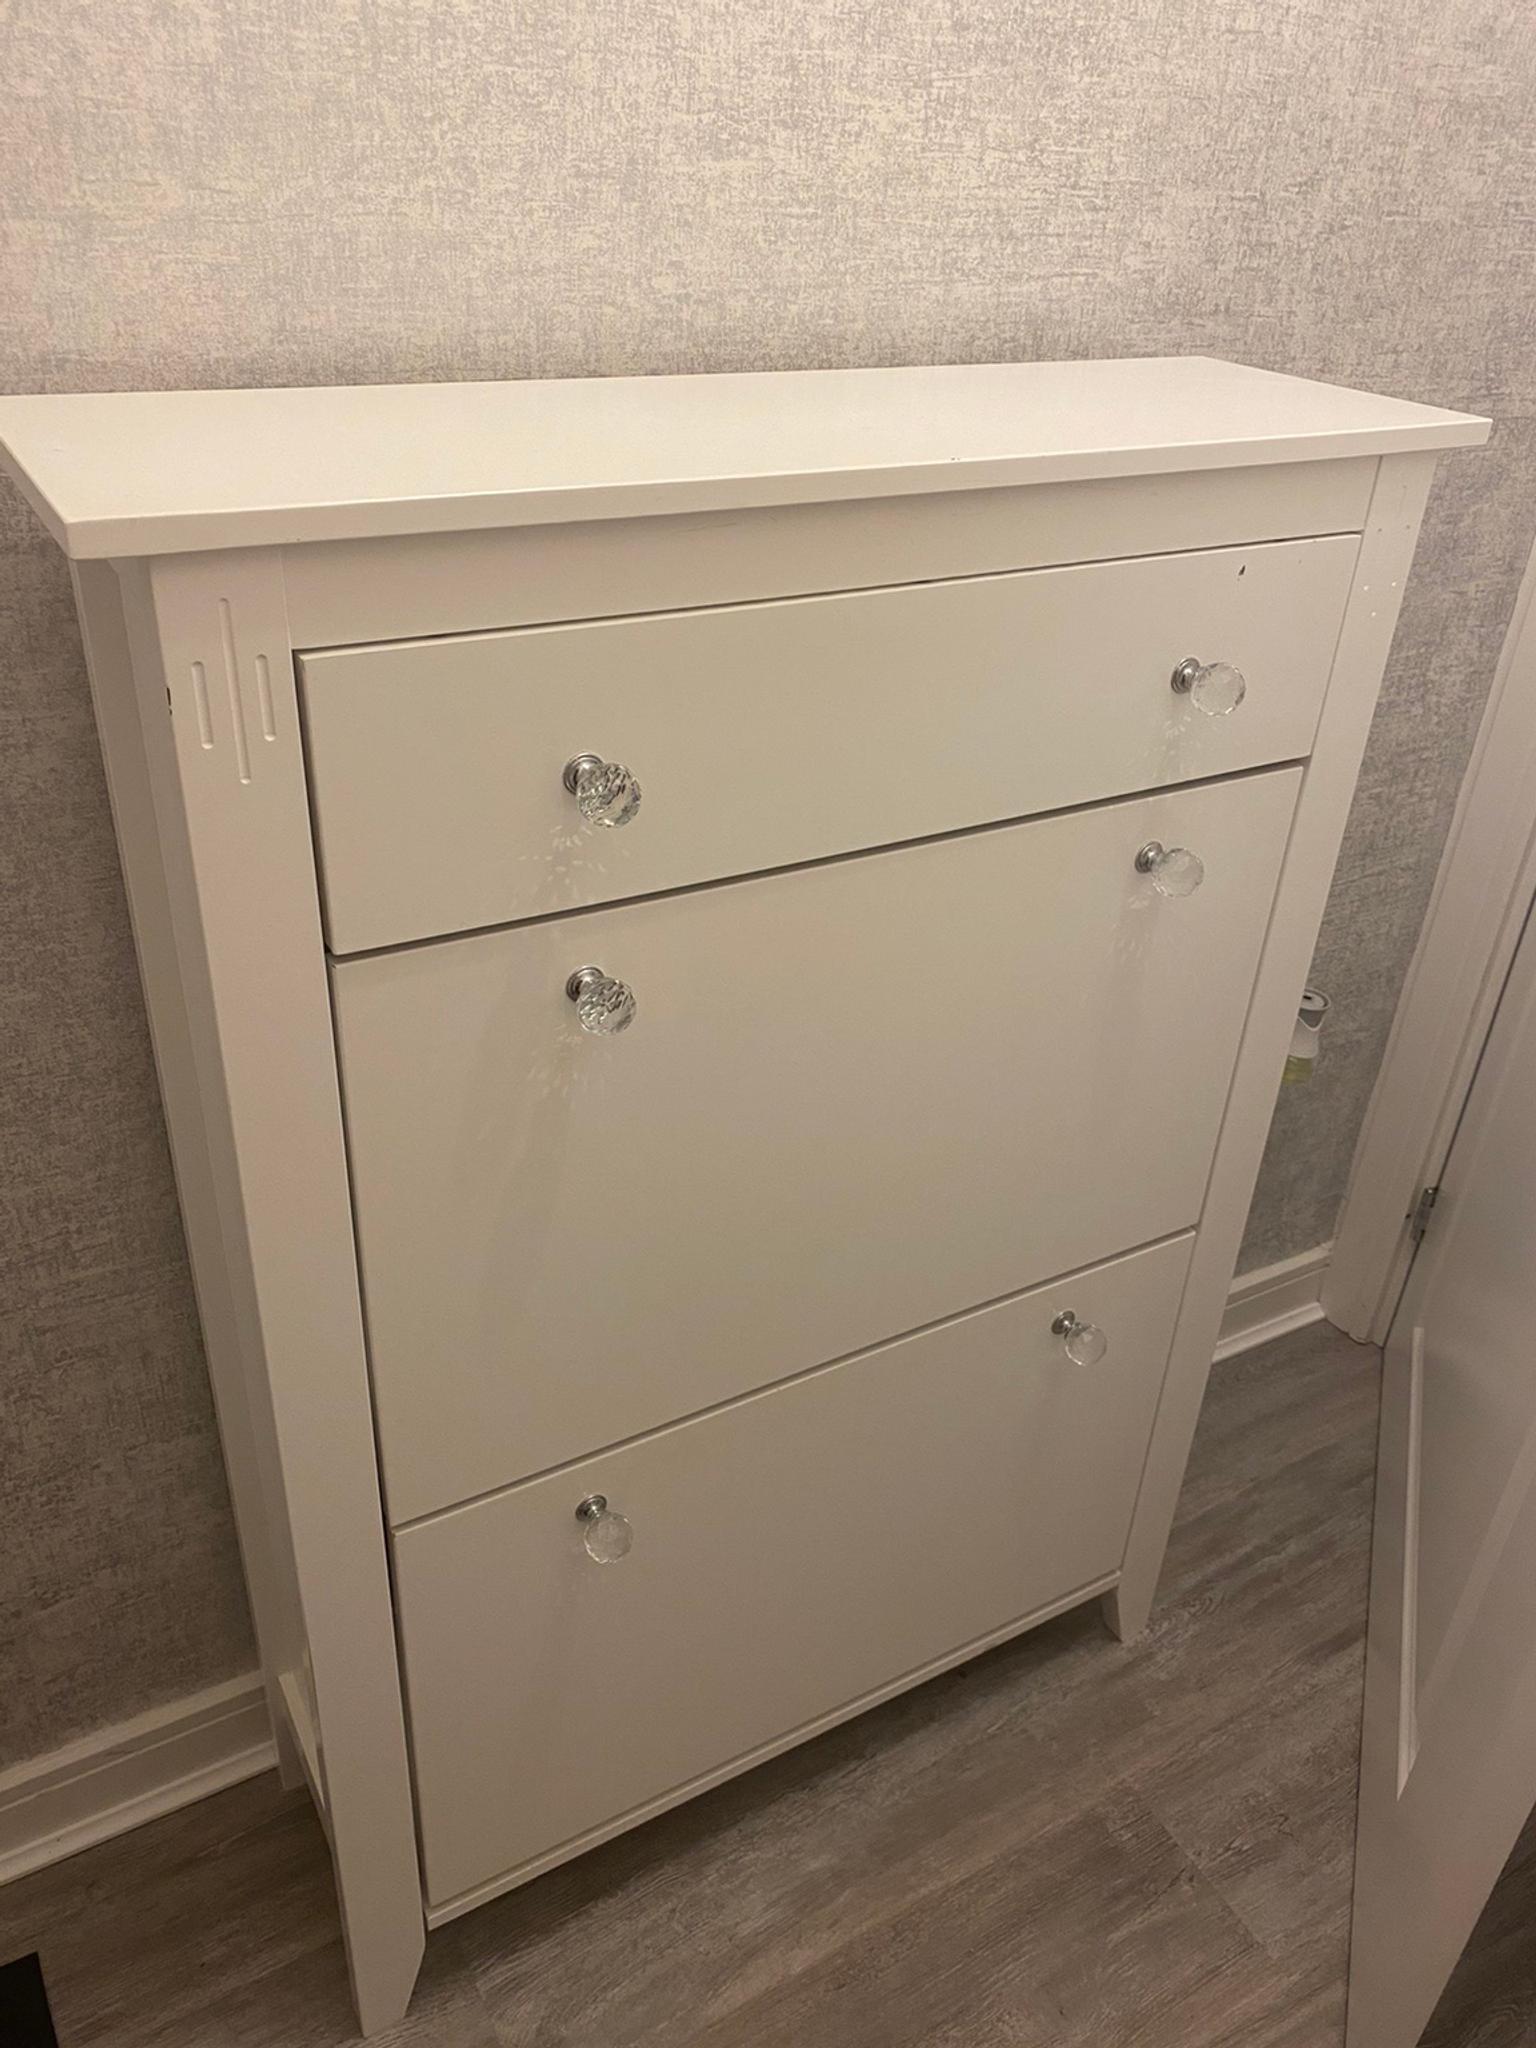 Ikea Shoe Cabinet In Bl1 Bolton For 30 00 For Sale Shpock